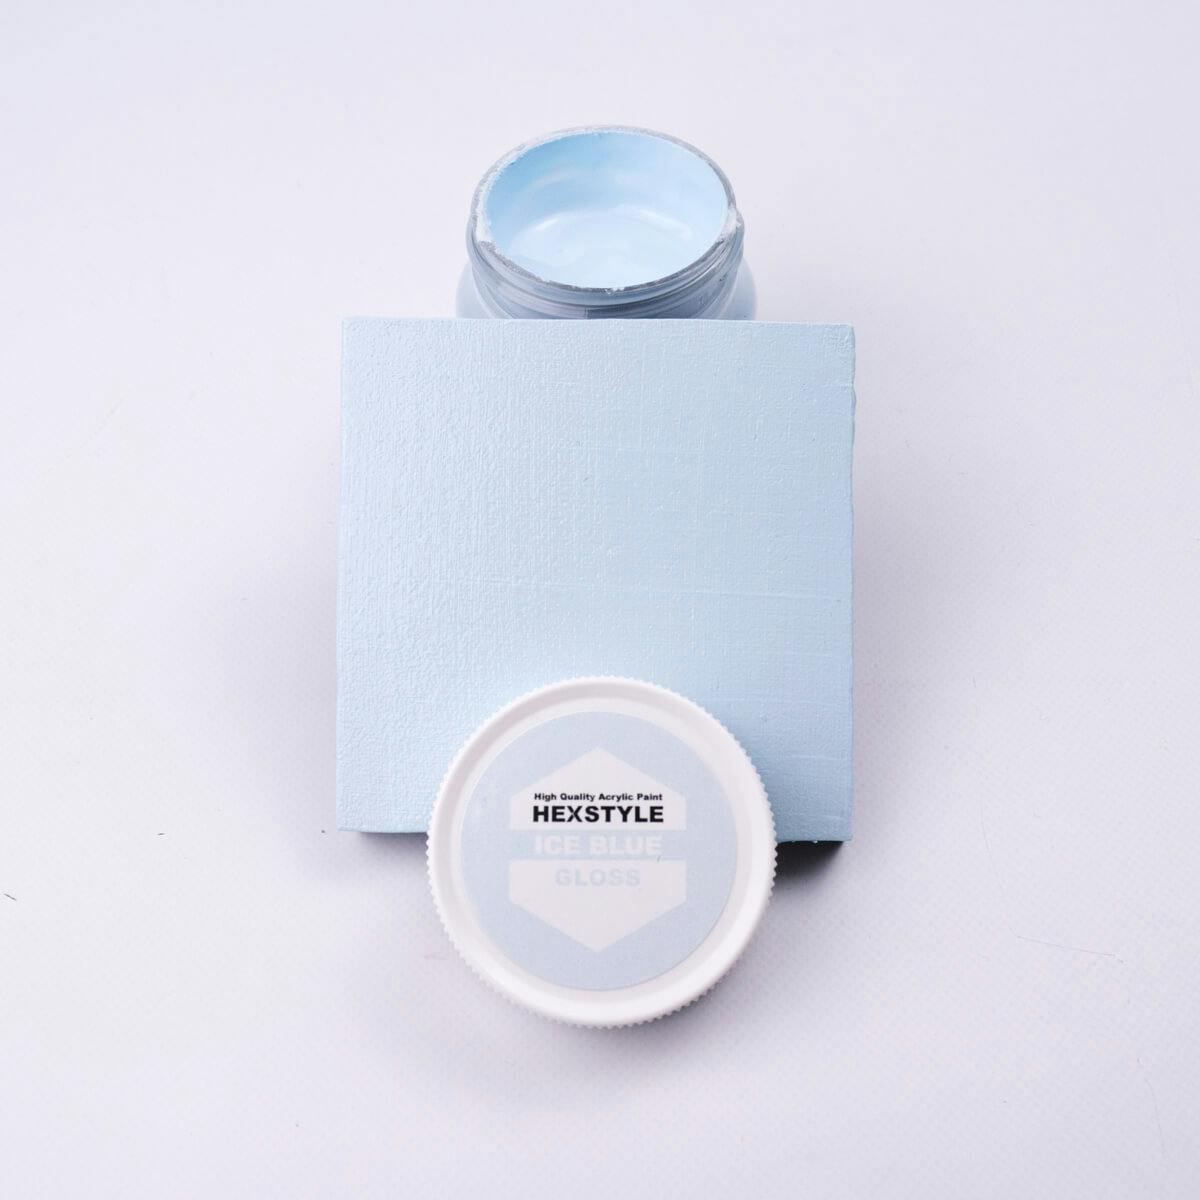 Hexstyle gloss ice blue colour swatch